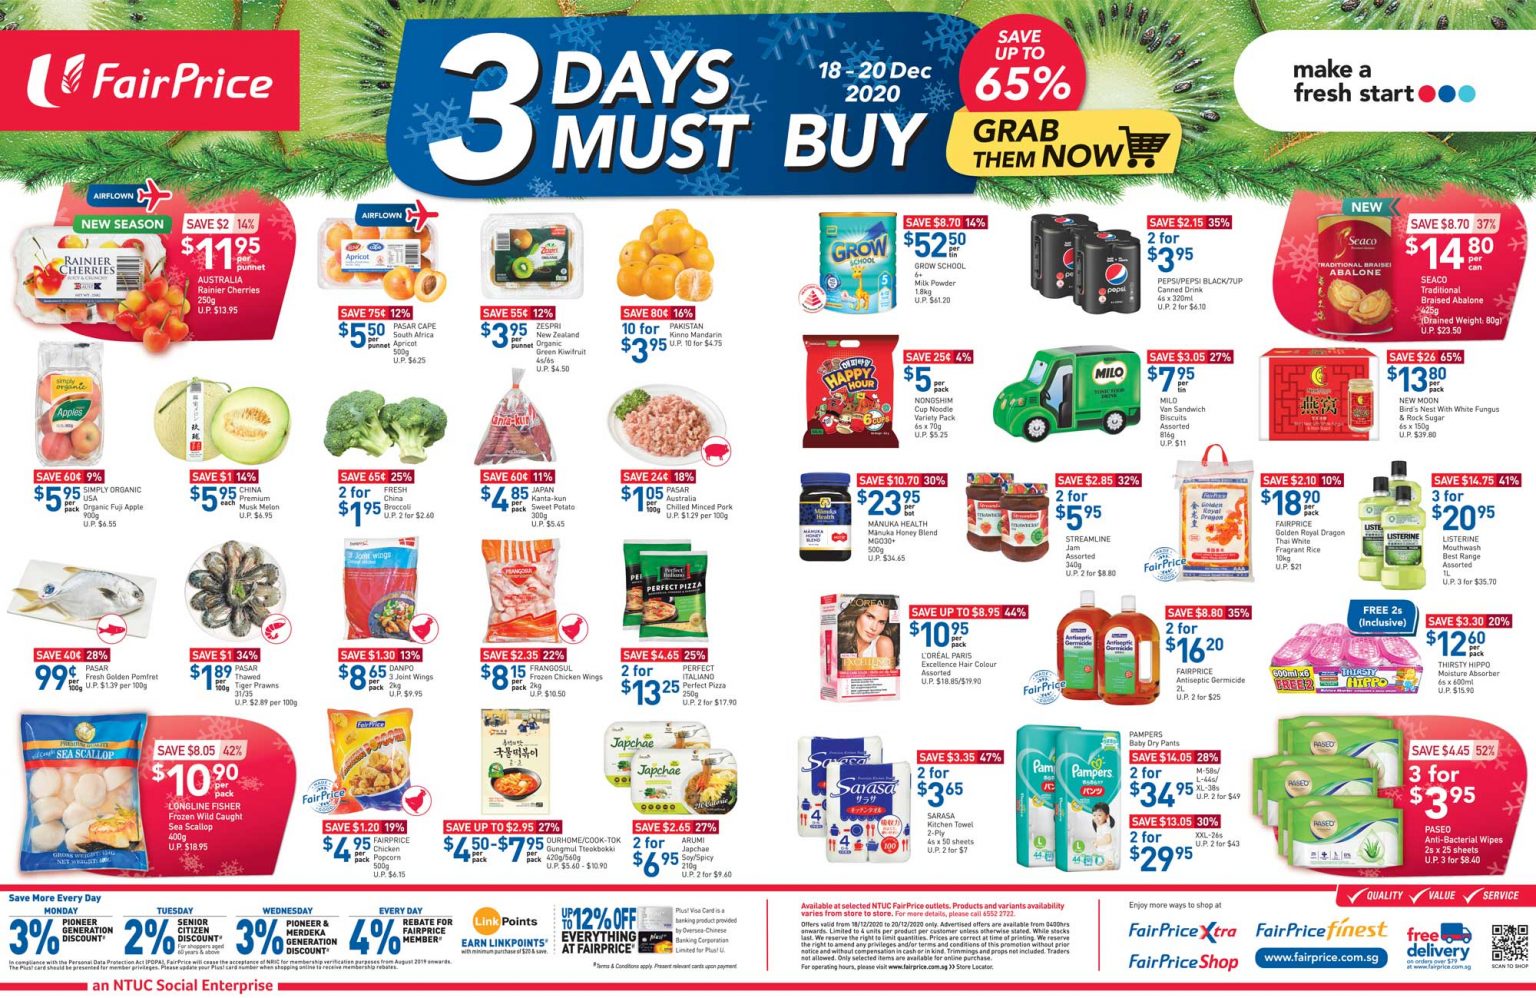 FairPrice’s 3 days must-buy items from 18 - 20 December 2020